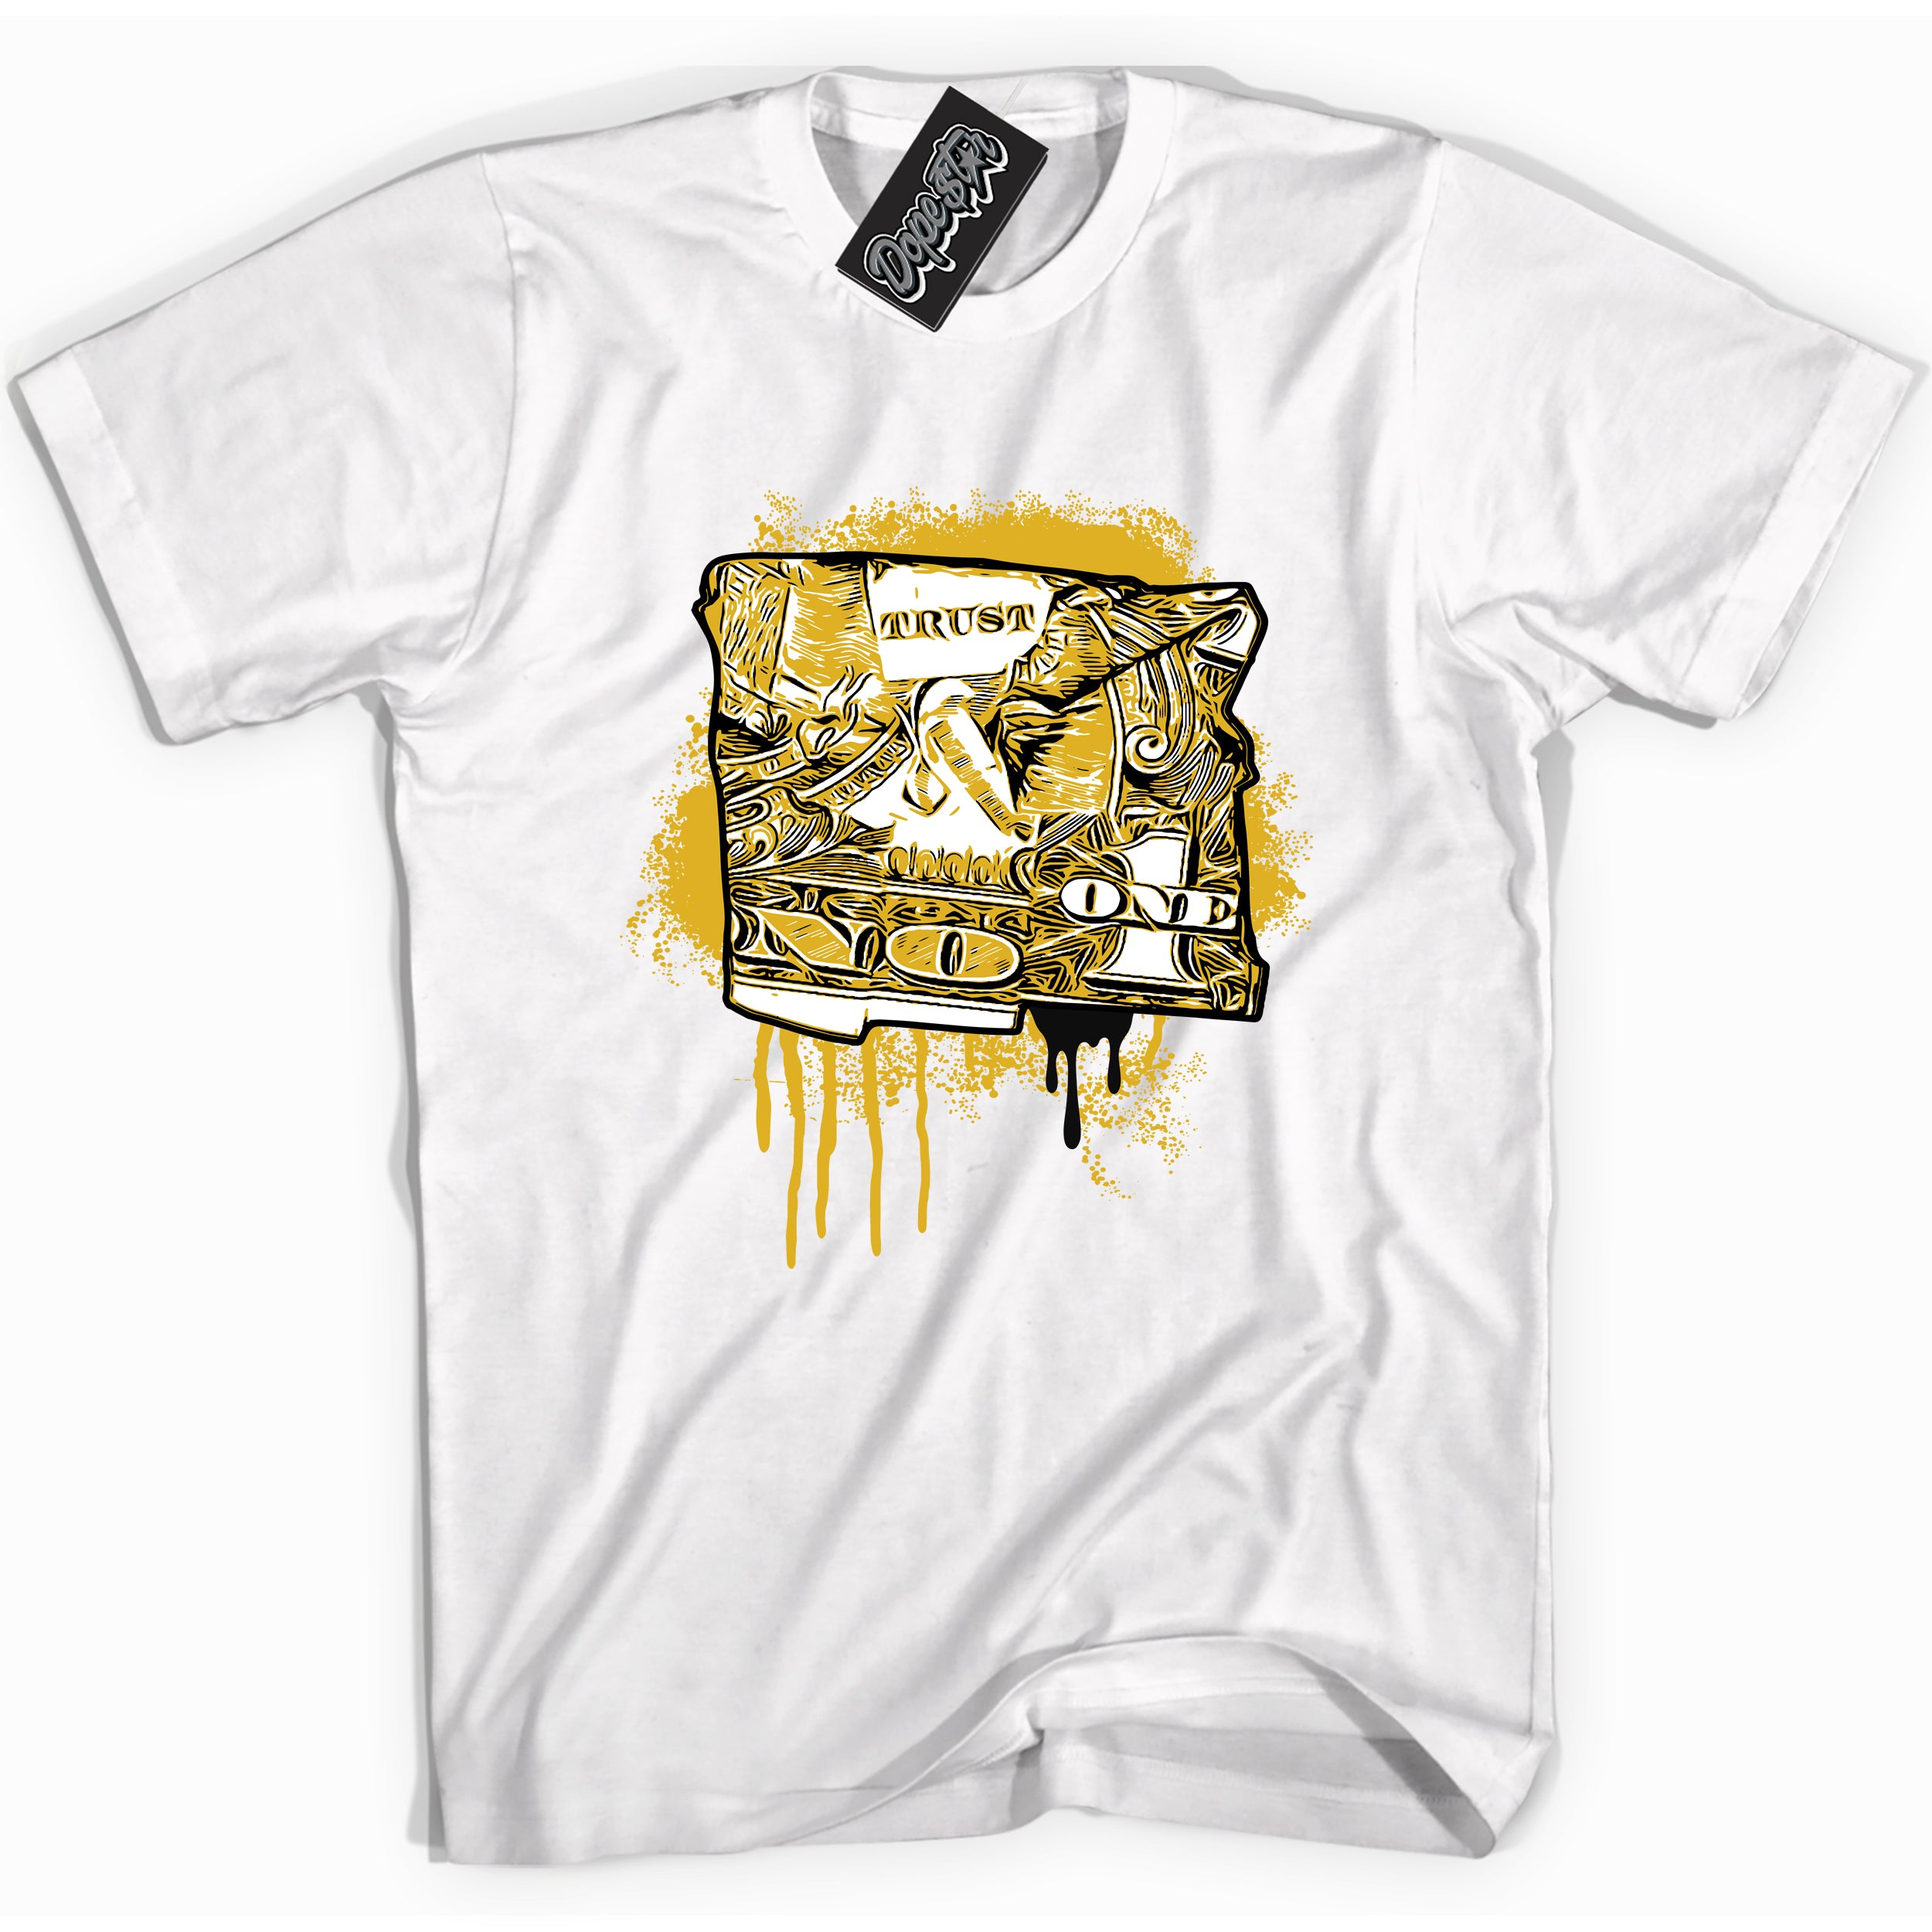 Cool white Shirt with “ Trust No One Dollar ” design that perfectly matches Yellow Ochre 6s Sneakers.